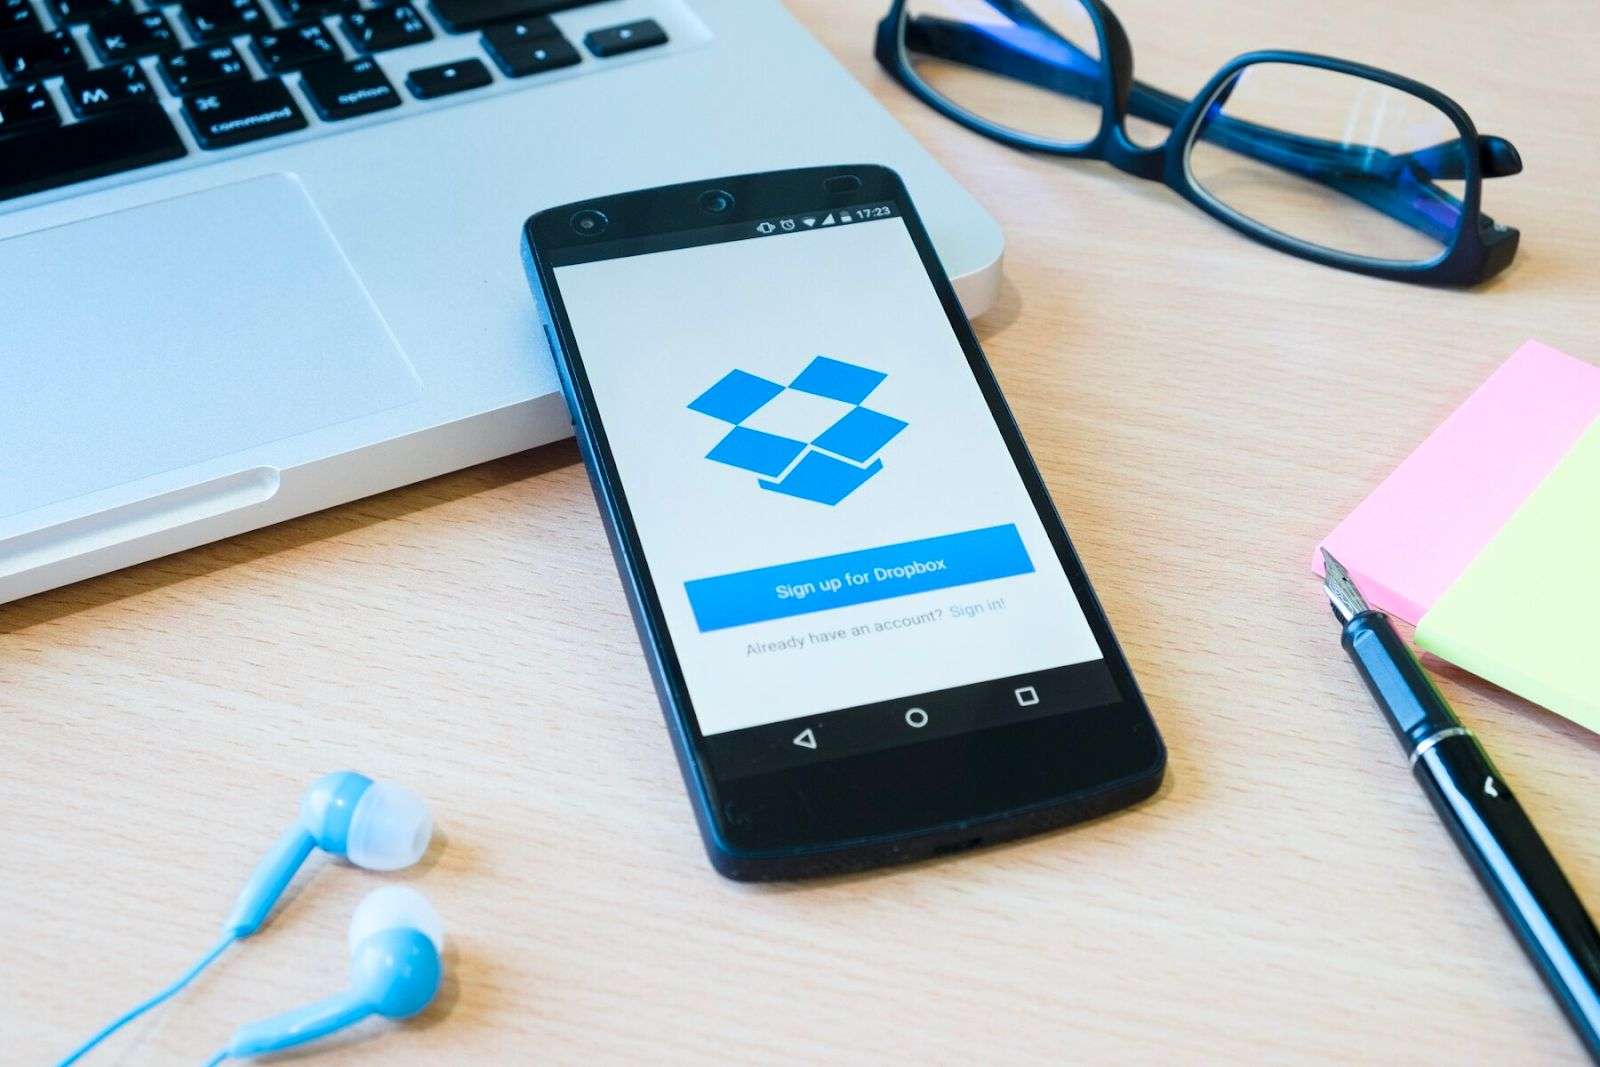 logo of dropbox on mobile device